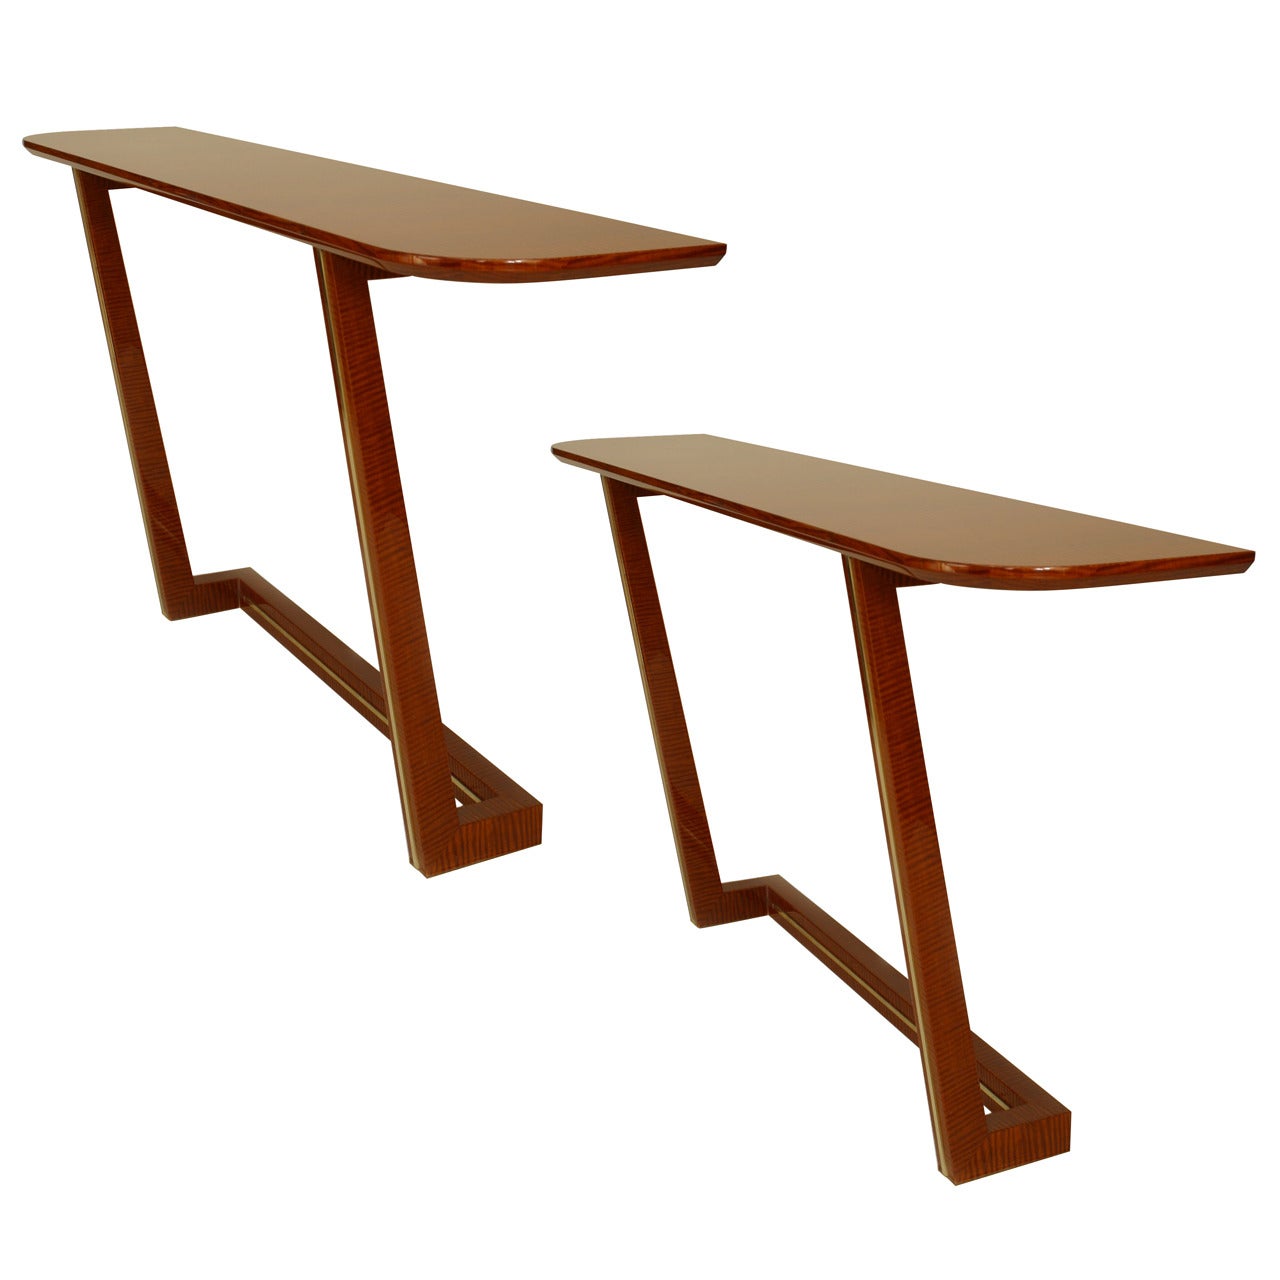 2 French 1940s style Modern Mahogany Veneered Console Tables